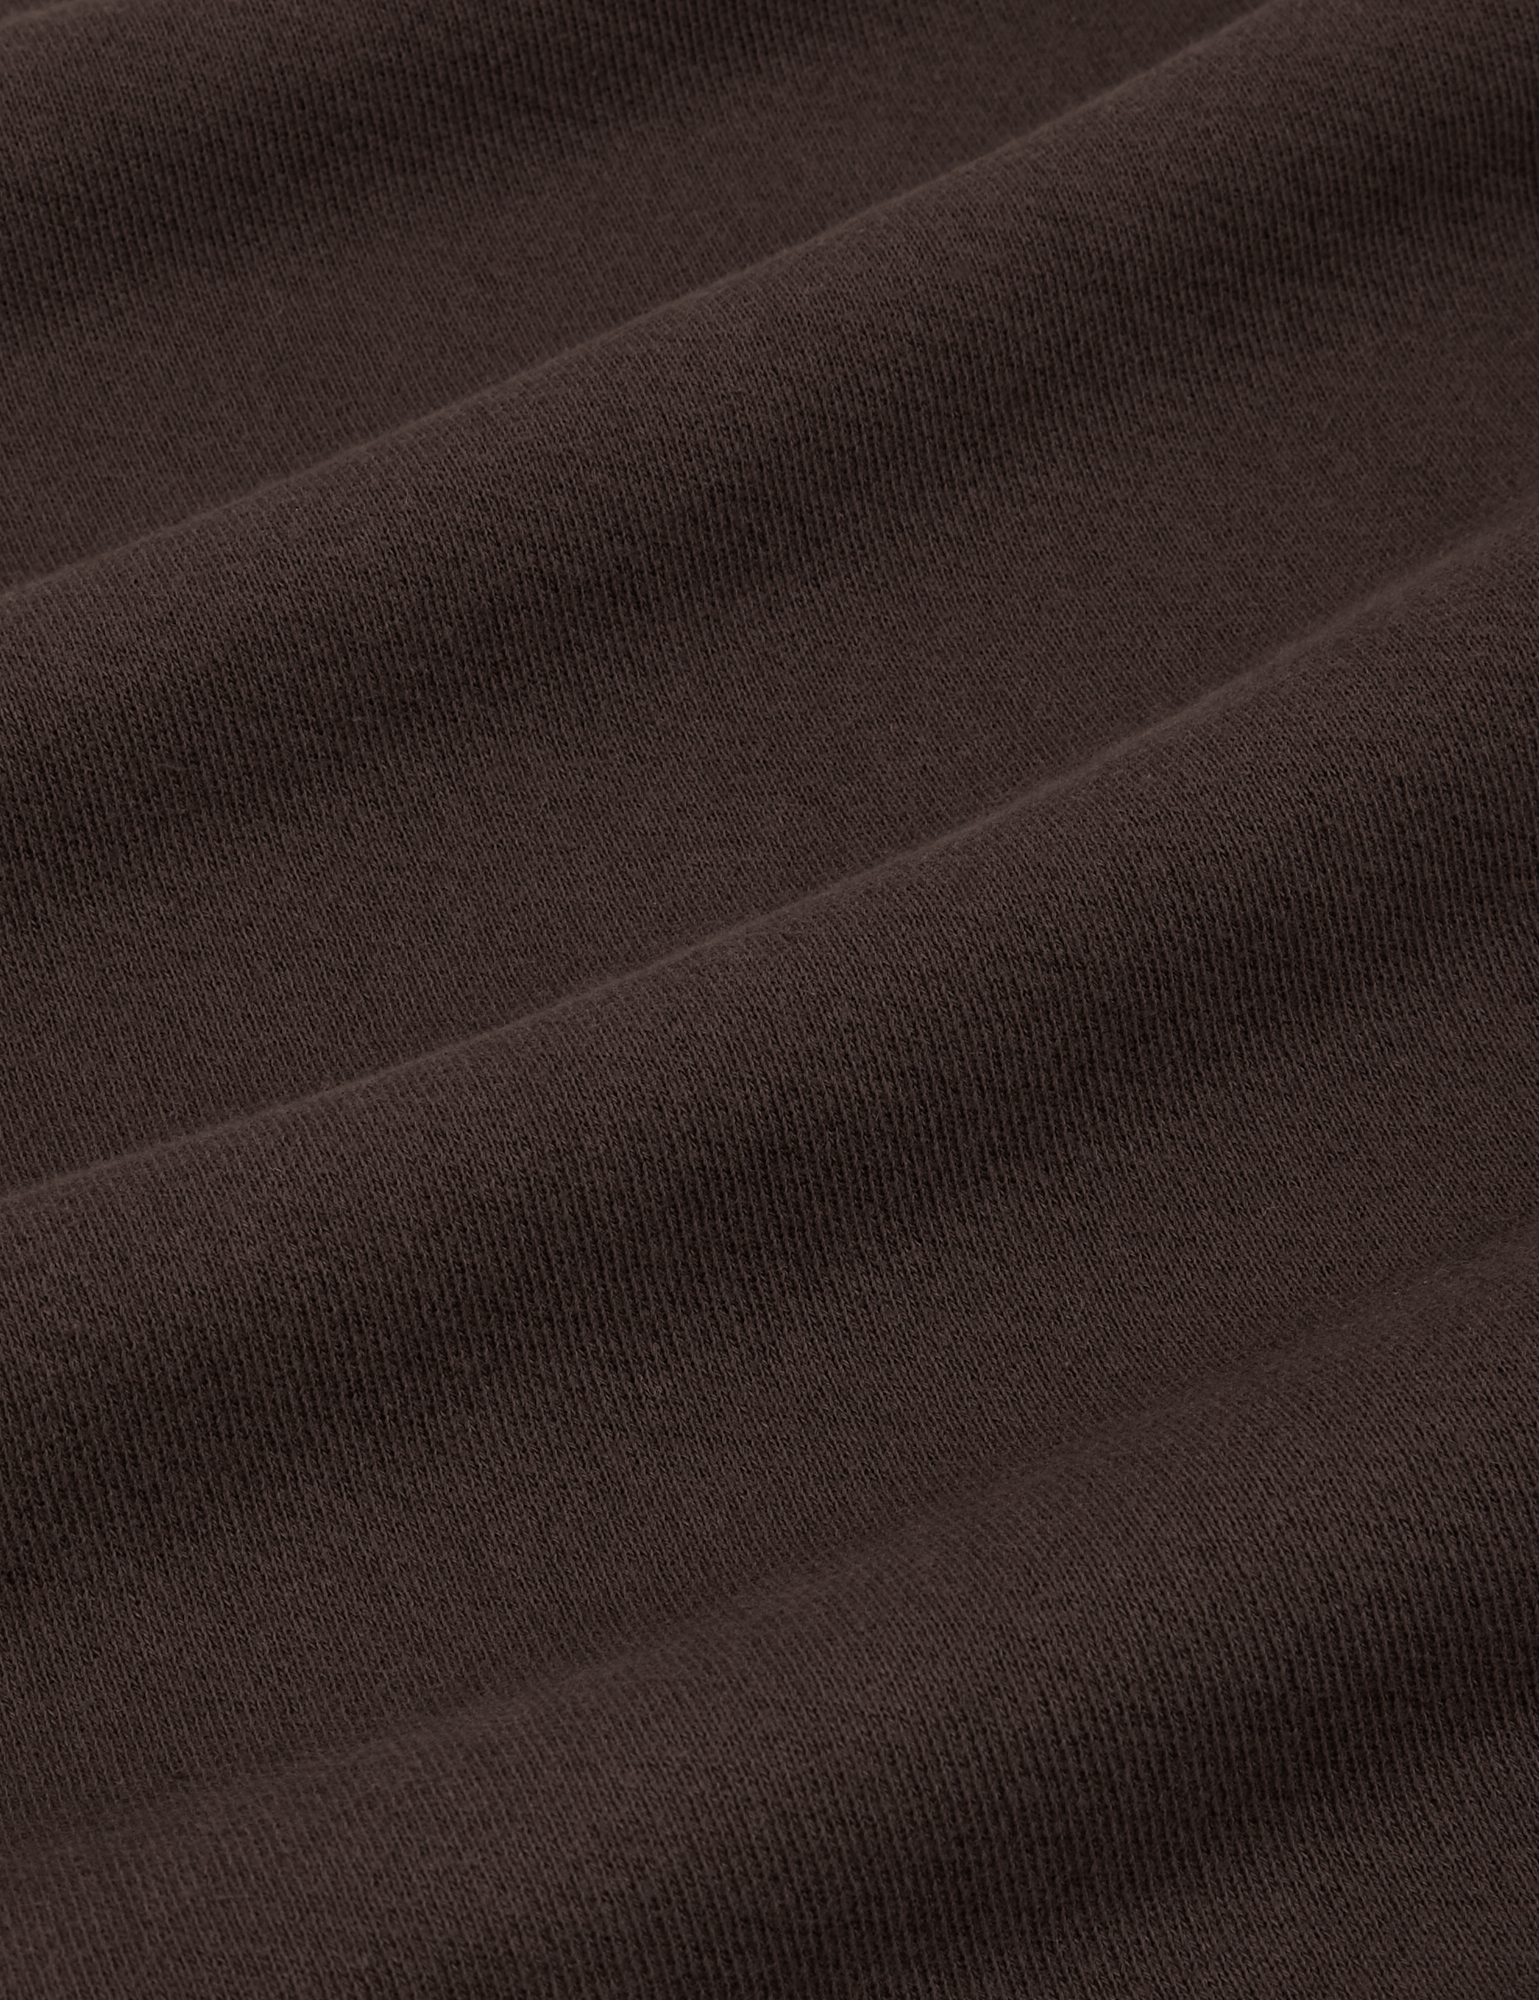 Rolled Cuff Sweat Pants in Espresso Brown fabric detail close up